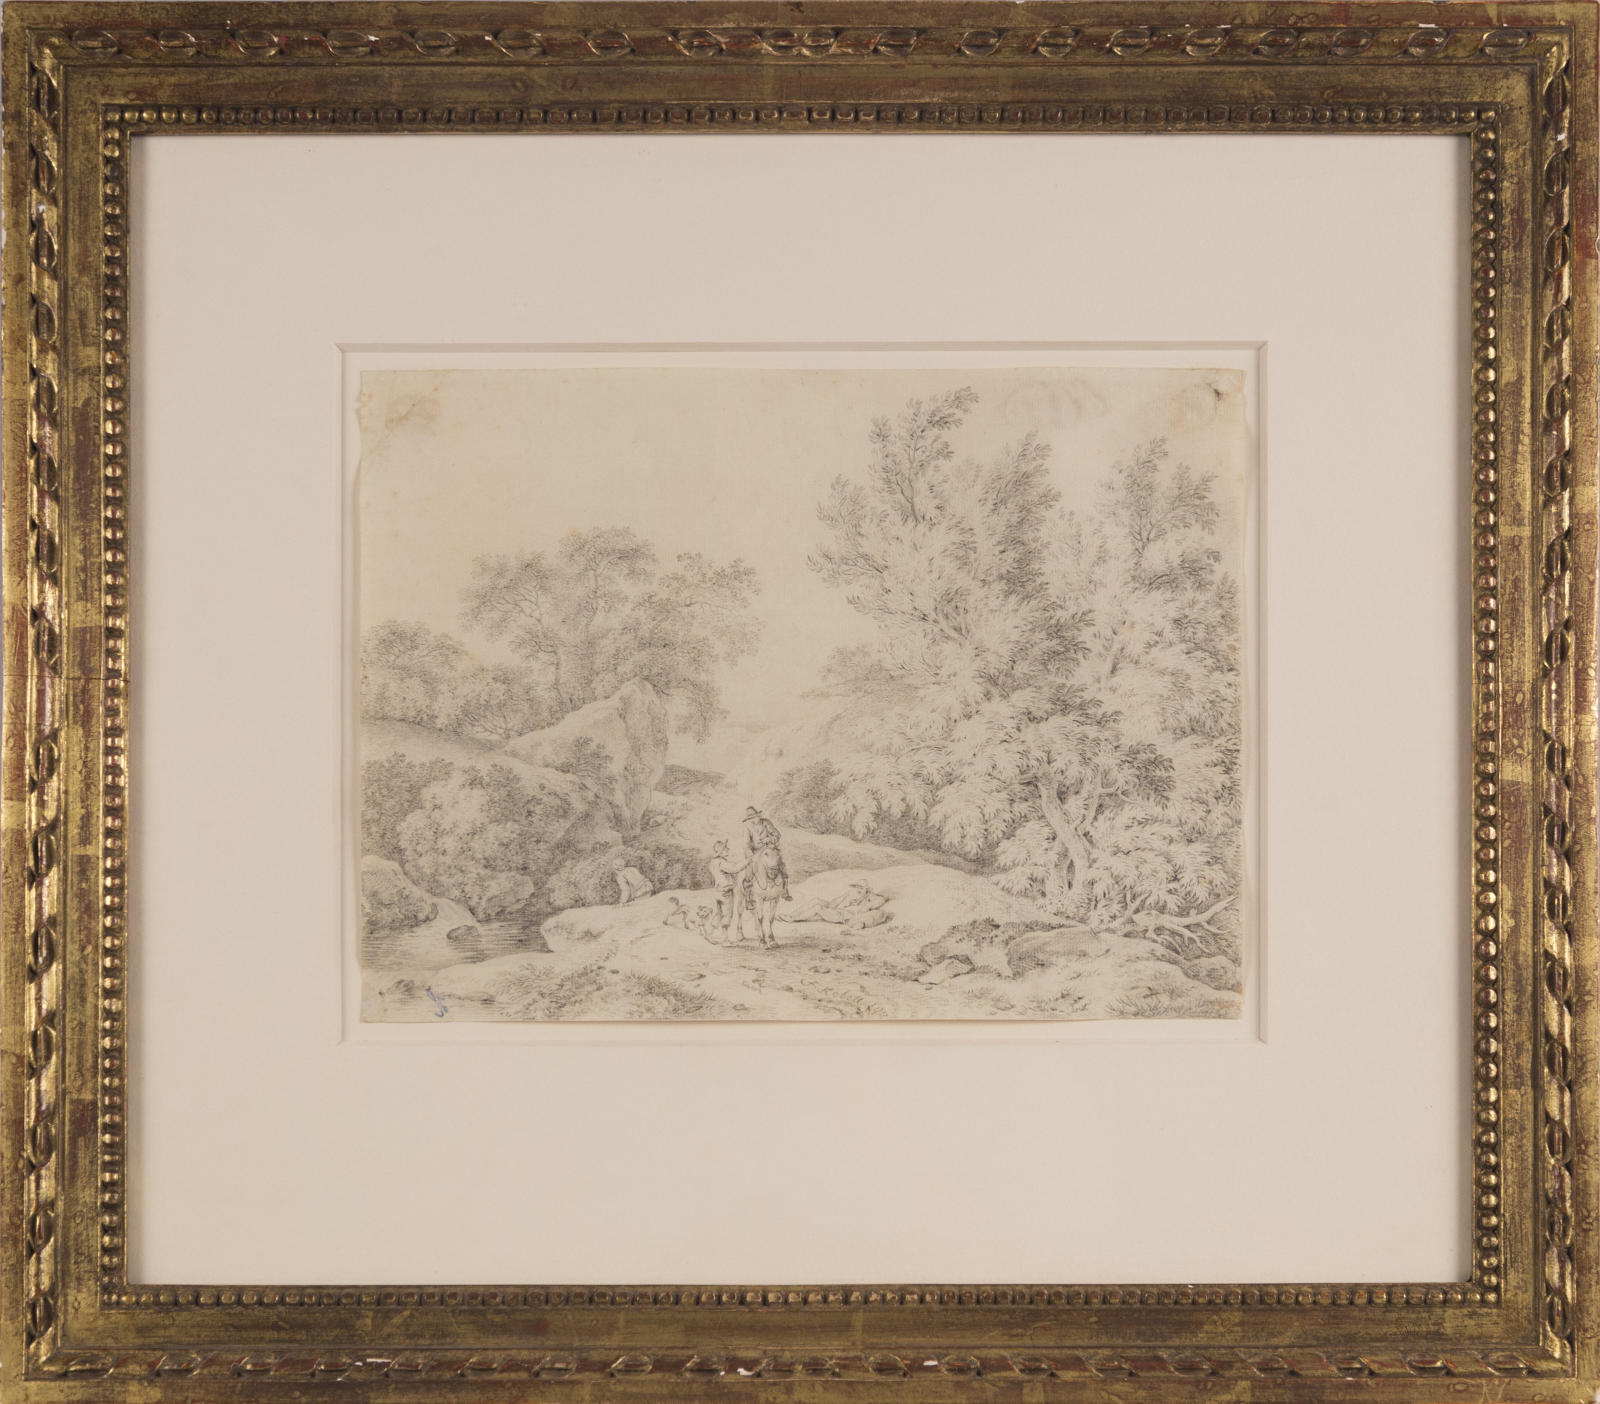 Landscape with Travelers Resting